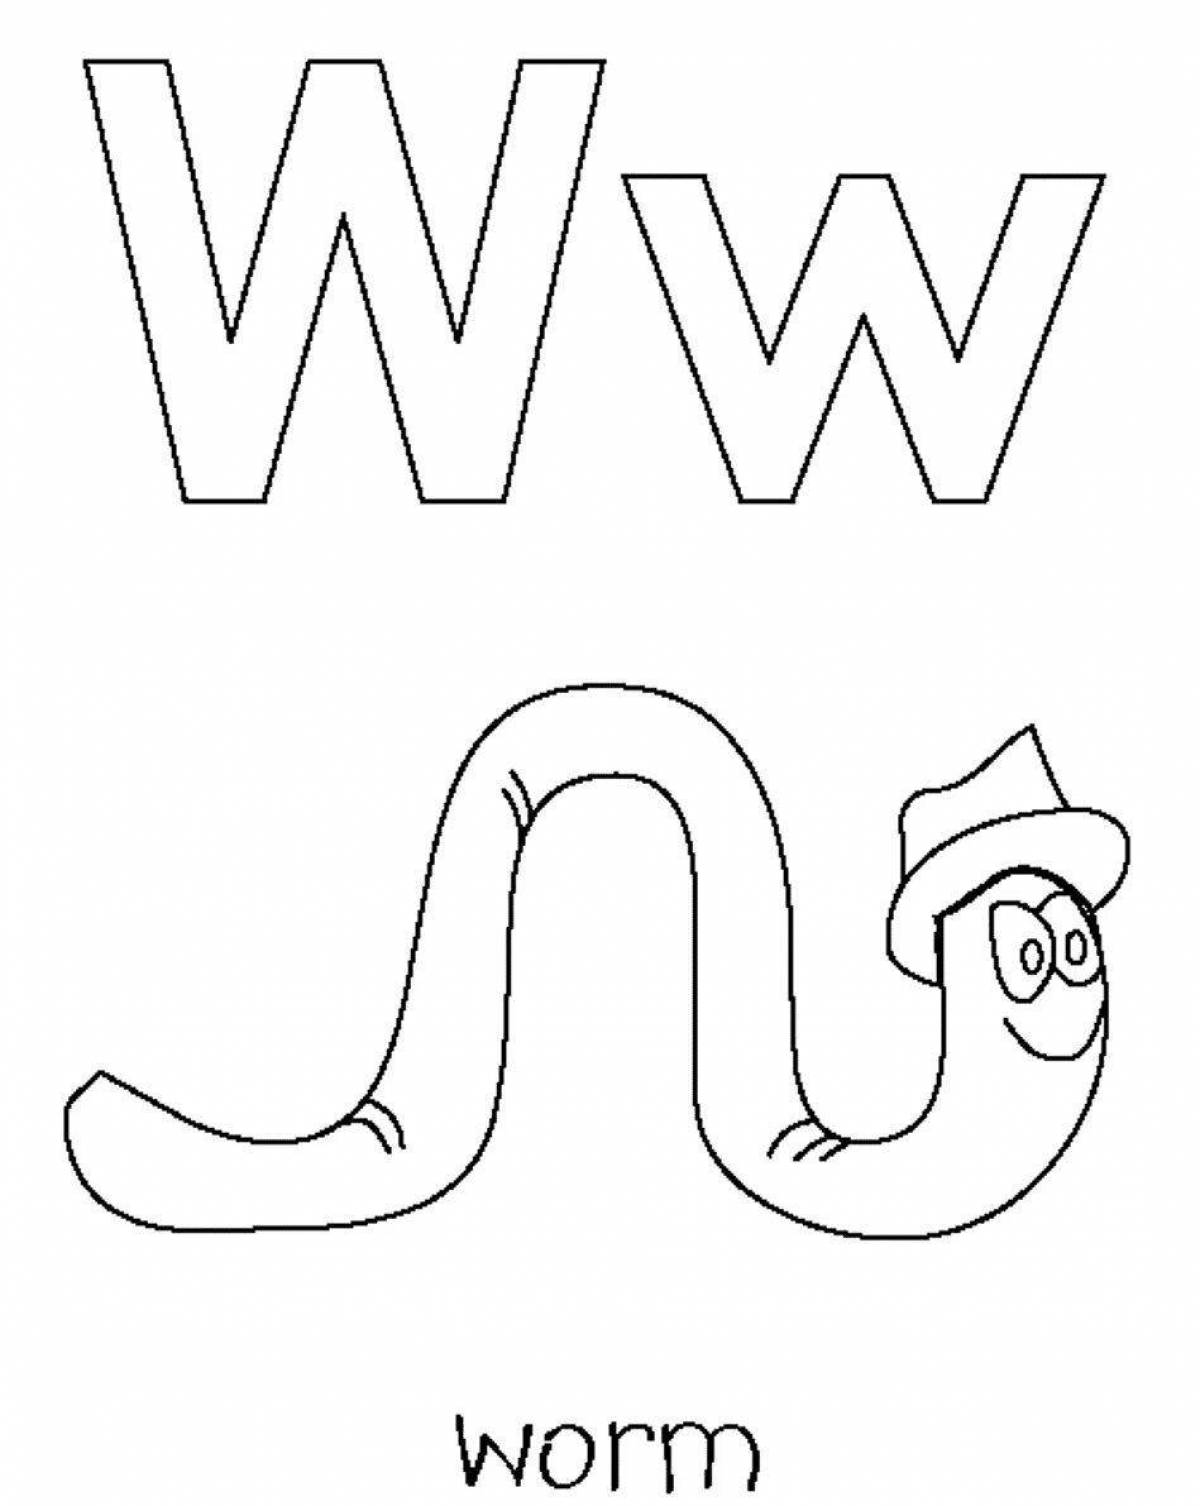 Coloring page adorable letter w